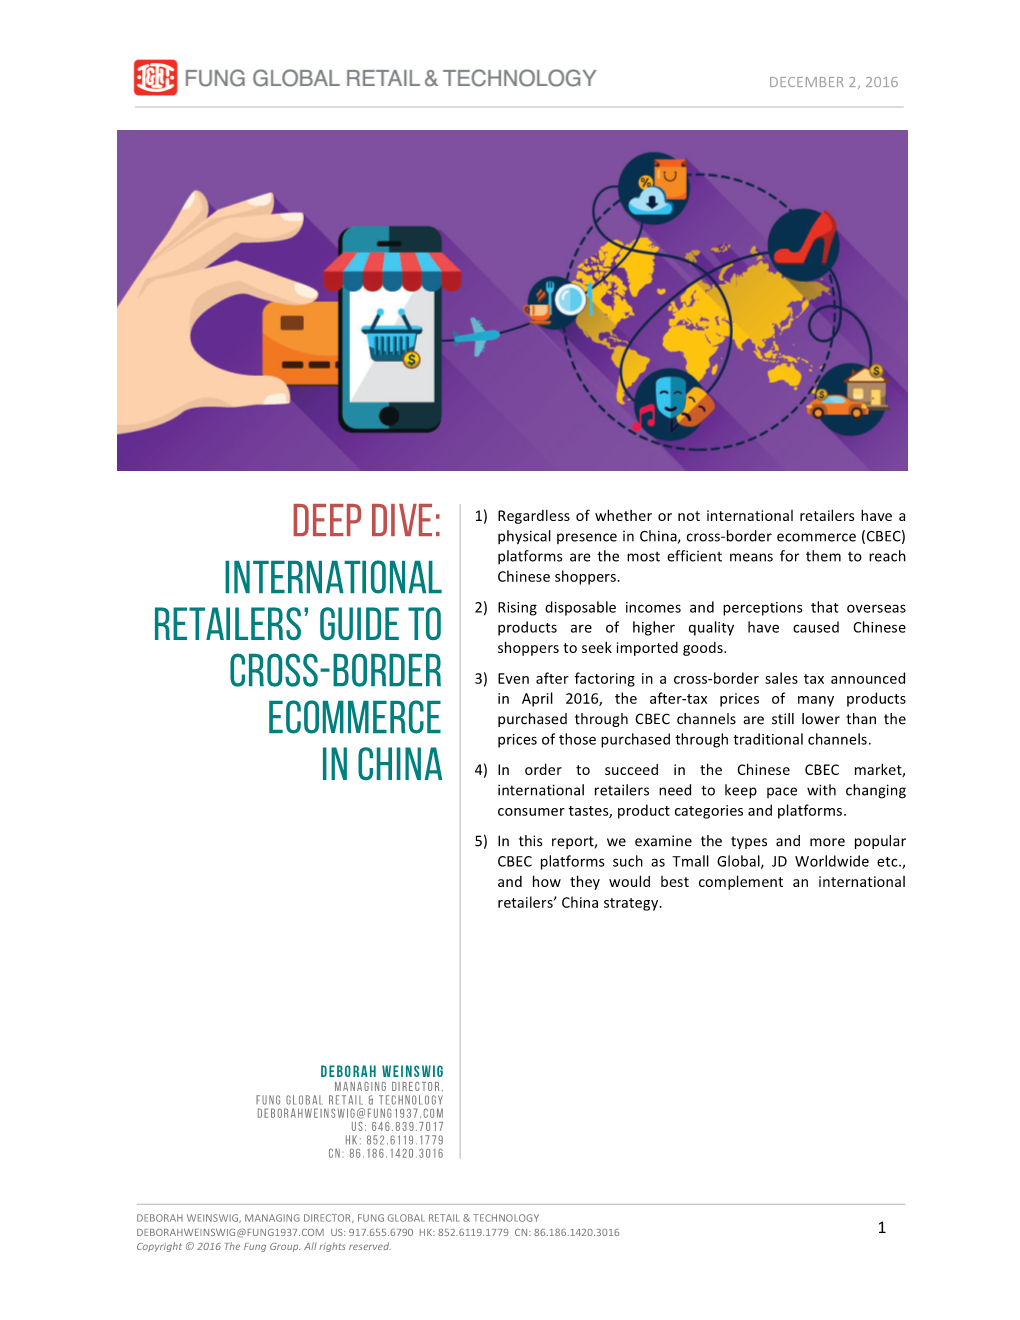 International Retailers' Guide to Cross-Border Ecommerce in China